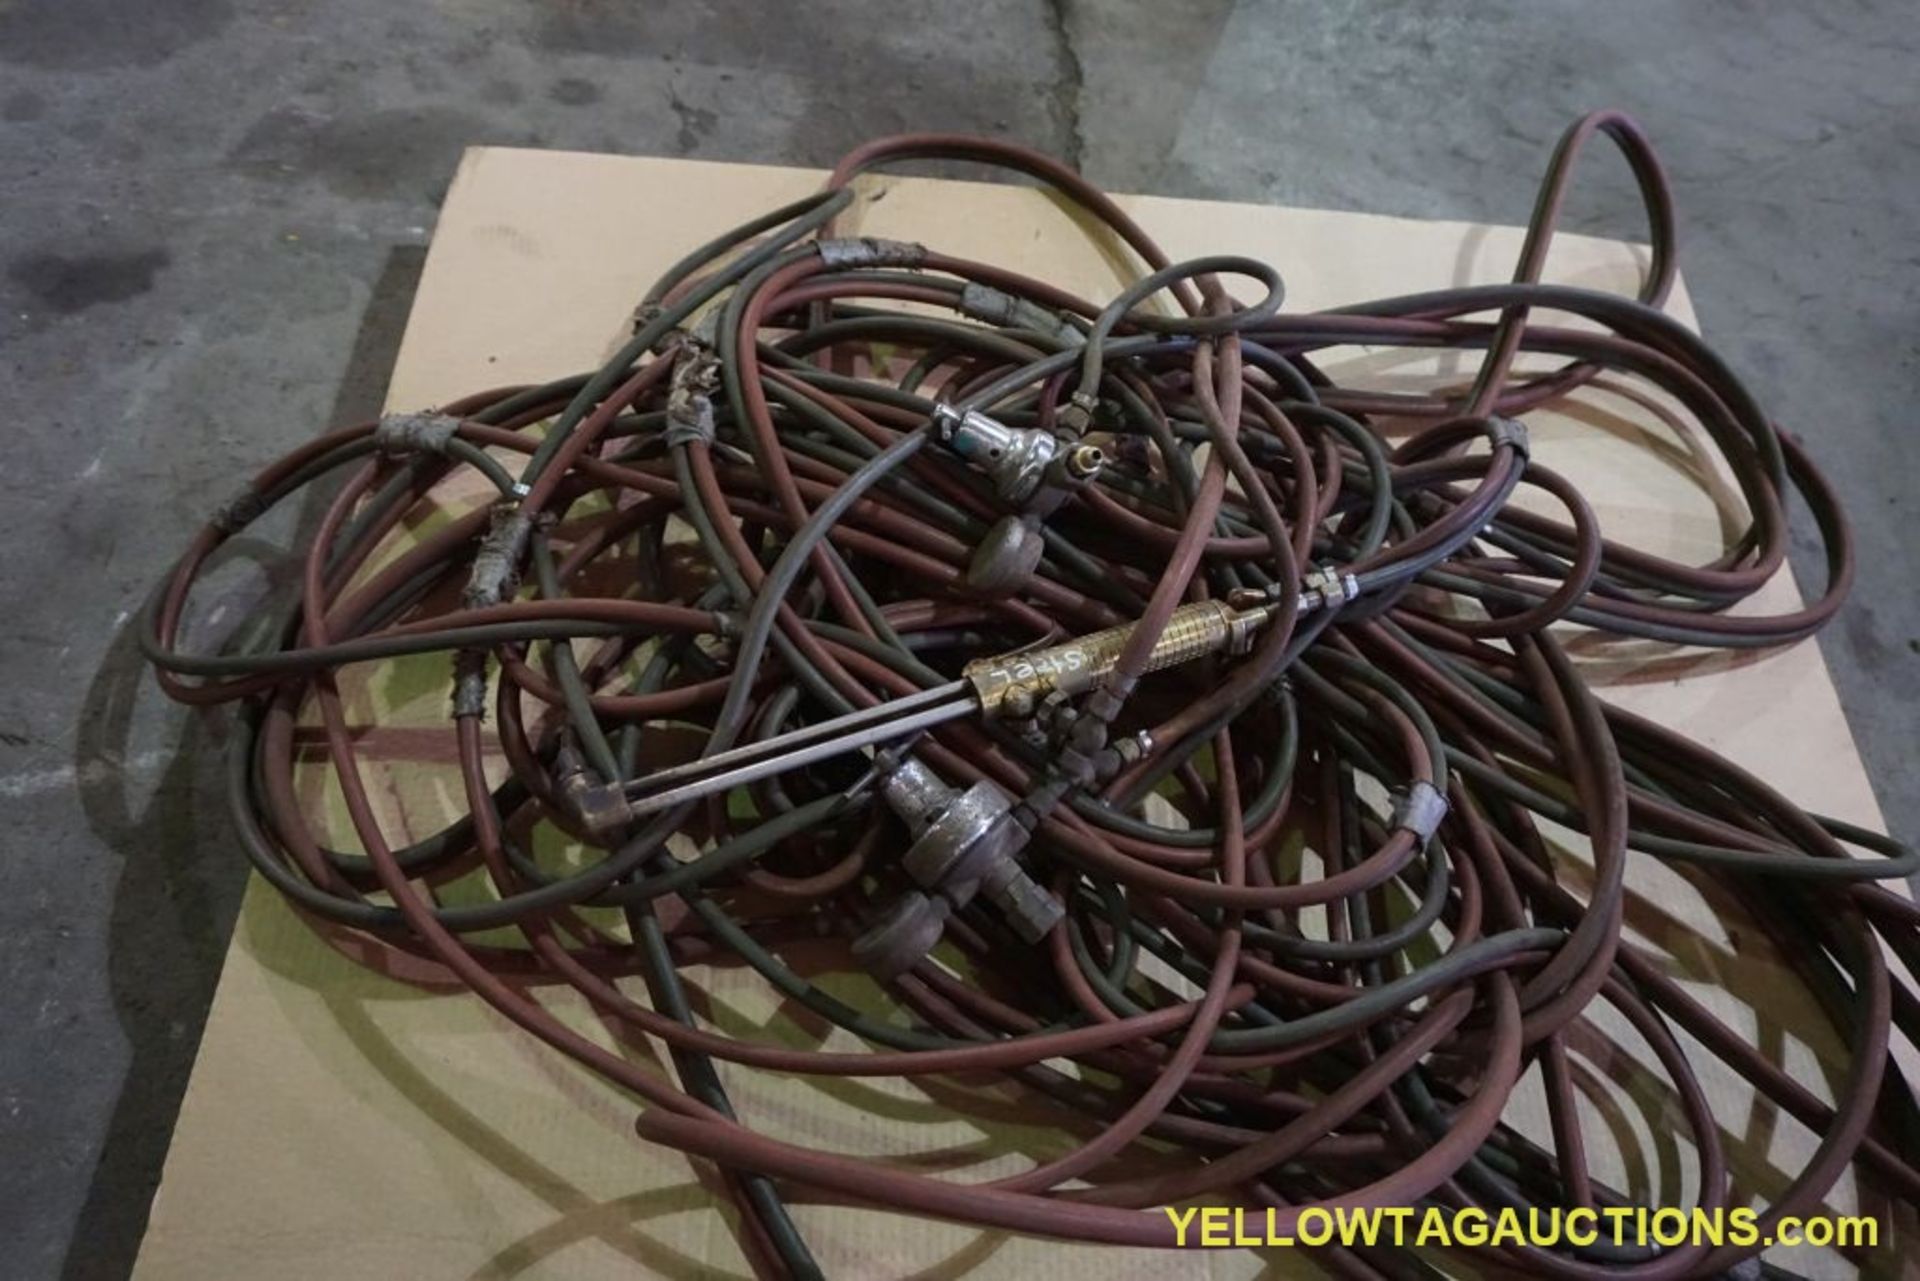 Lot of Assorted Welding Hose - Image 4 of 6